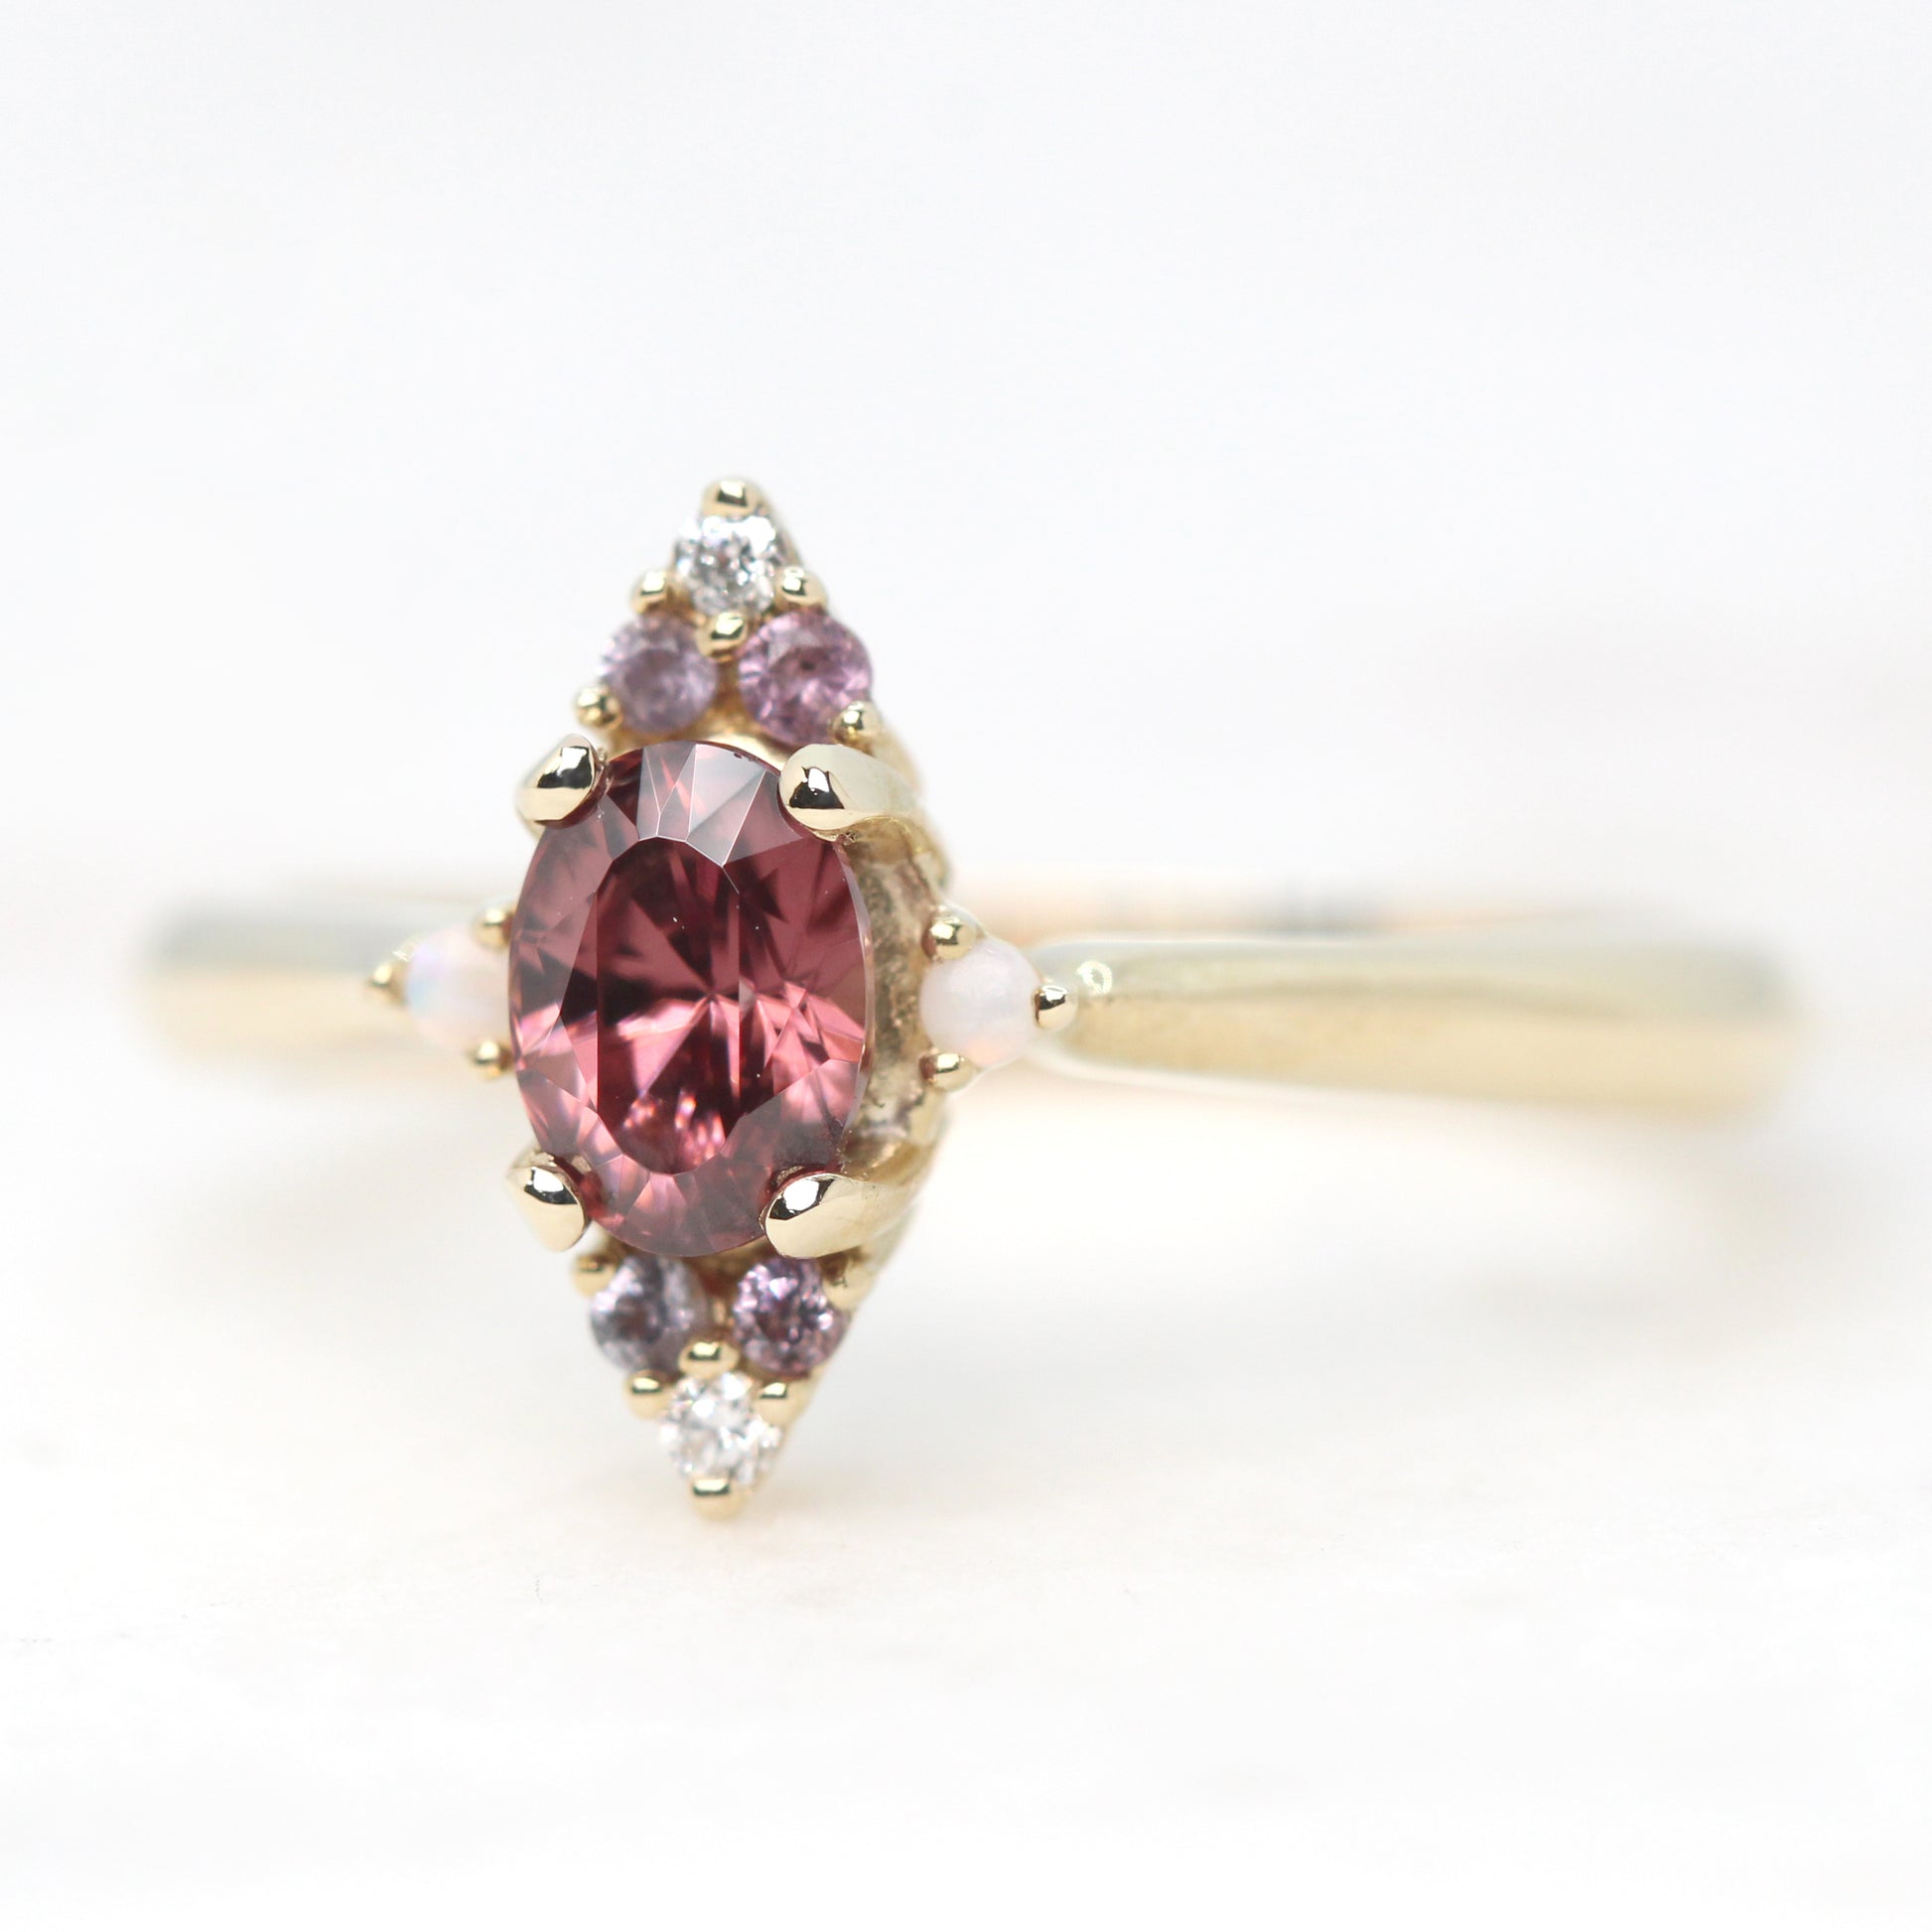 Emery Ring with a 0.98 Carat Oval Zircon and White Diamond, Purple Sapphire & Opal Accents in 14k Yellow Gold - Ready to Size and Ship - Midwinter Co. Alternative Bridal Rings and Modern Fine Jewelry